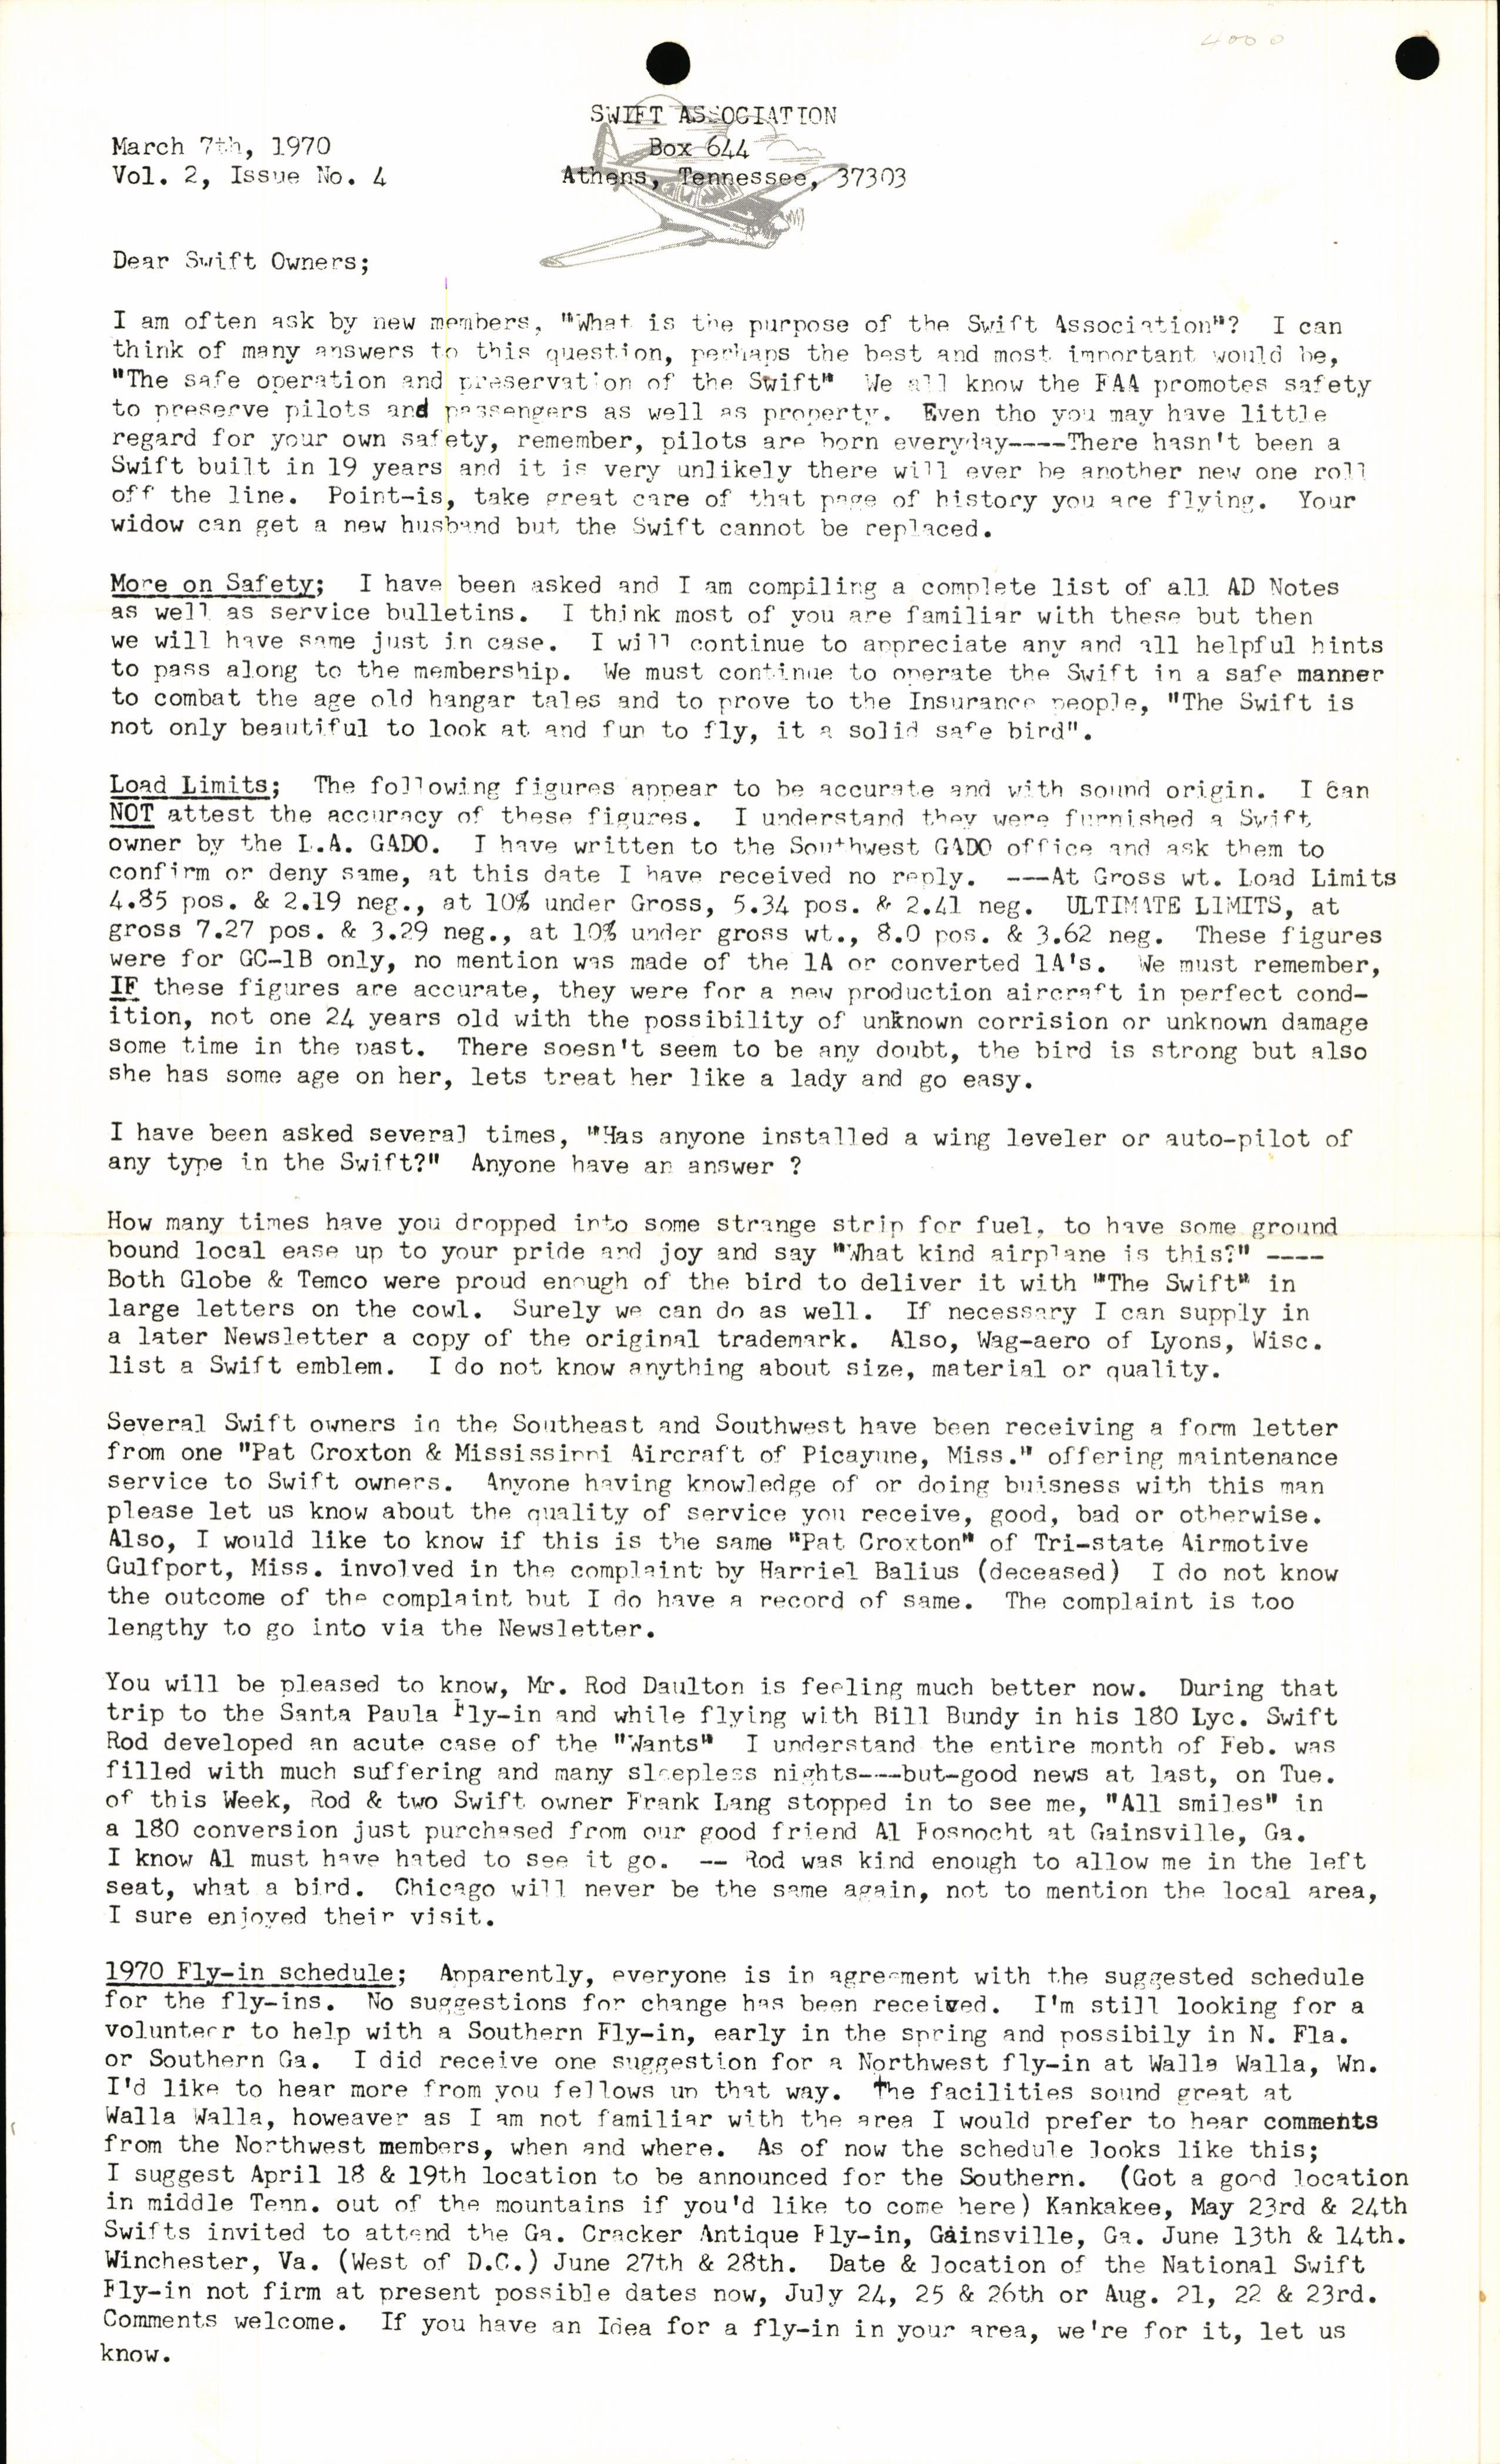 Sample page 1 from AirCorps Library document: March 1970